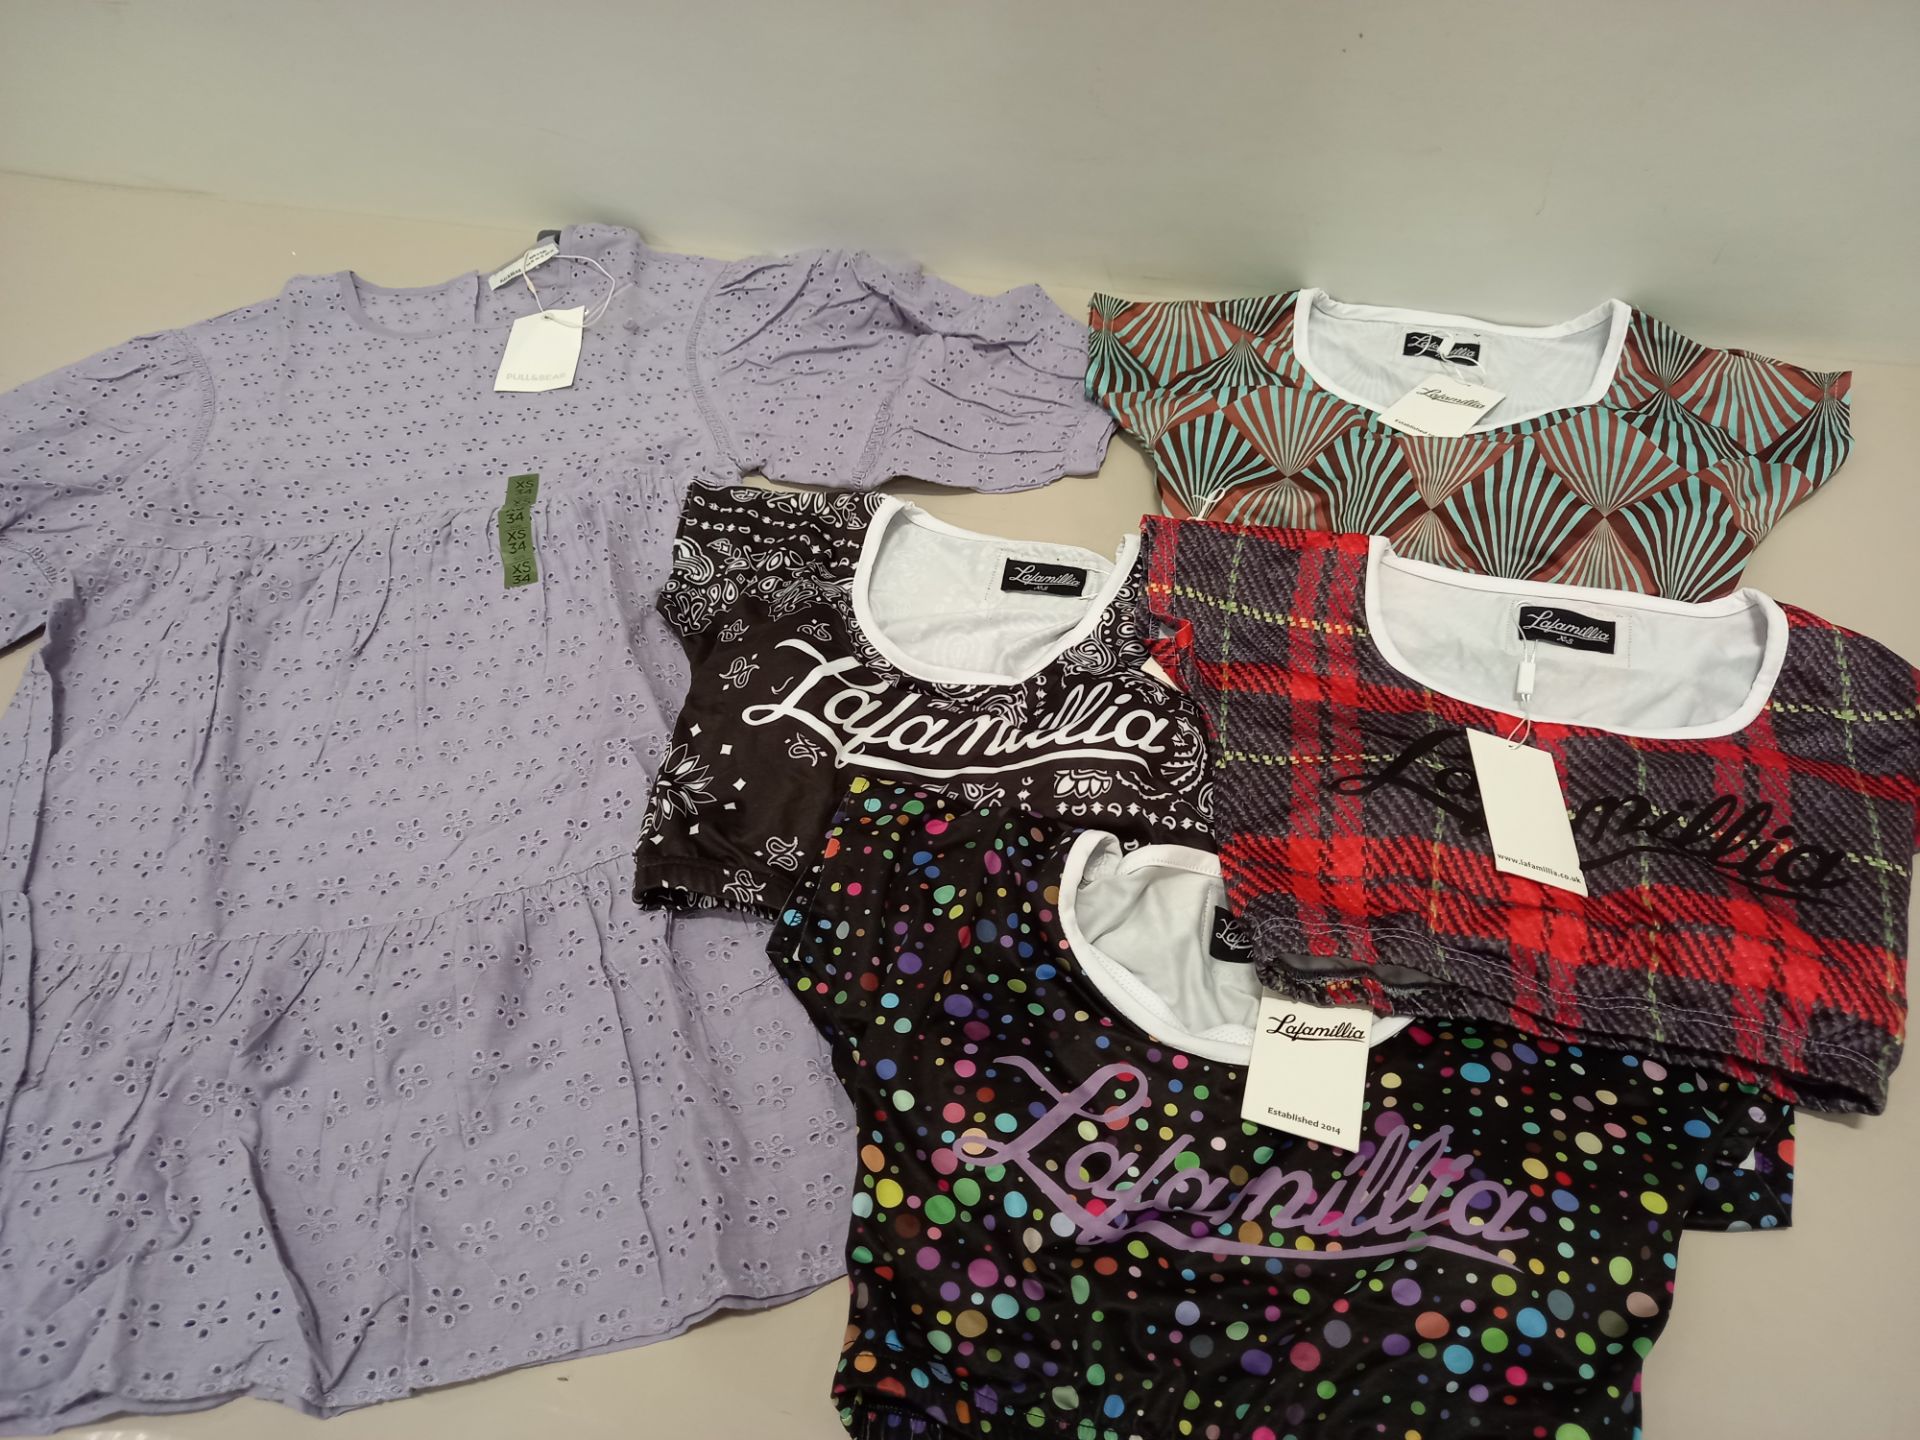 5 TRAYS (NOT INCLUDED) OF VARIOUS ITEMS OF CLOTHING IE LA FAMILIA SHIRTS, CHEQUERED PANTS AND